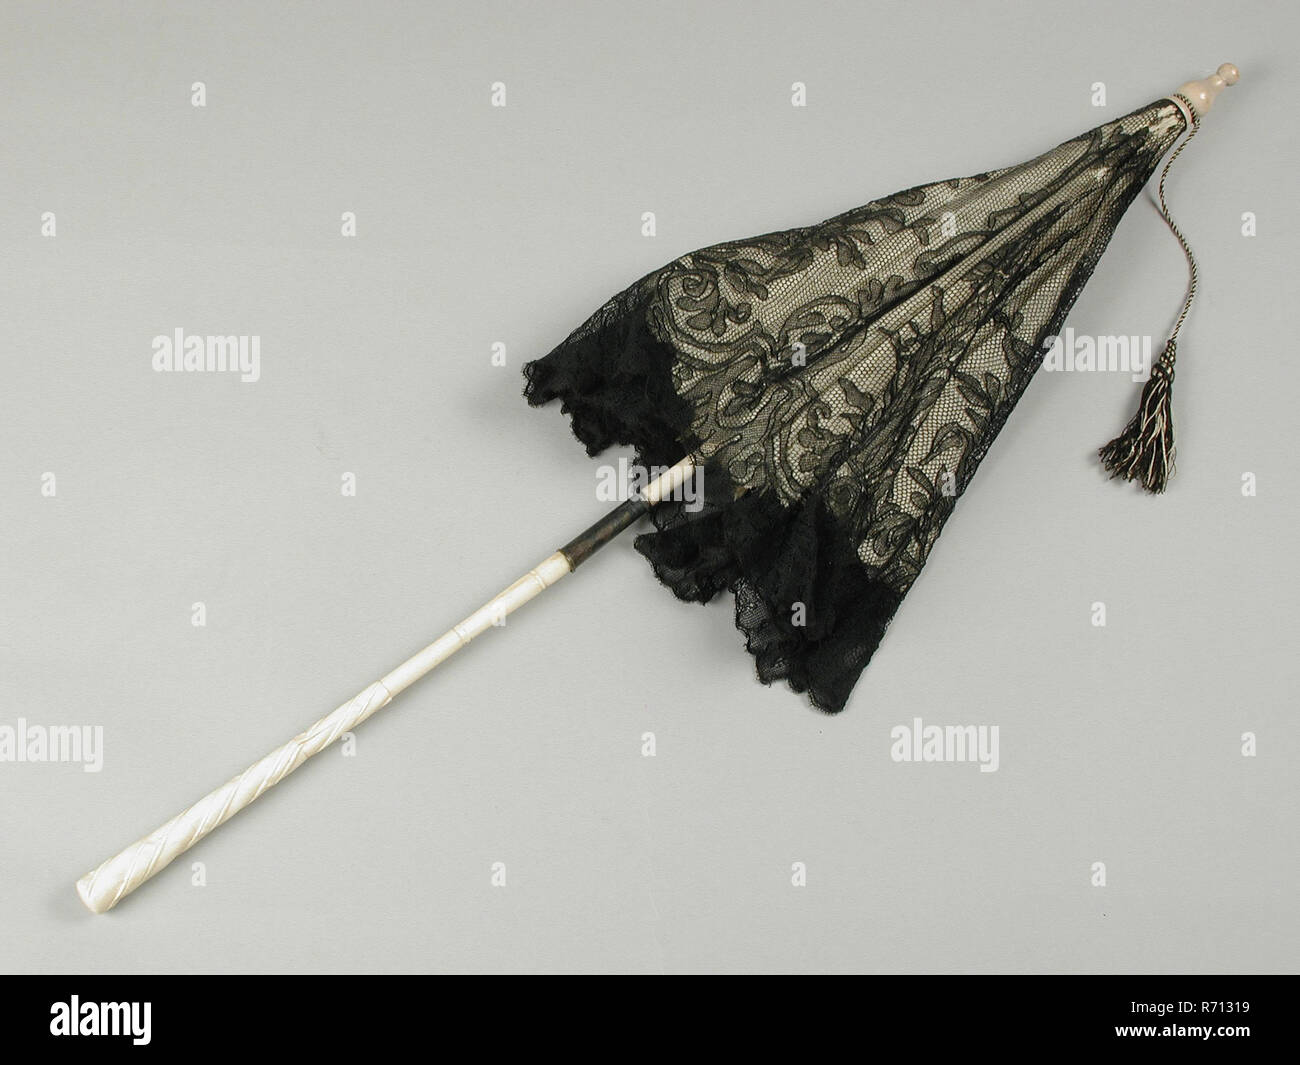 Carriage umbrella with ivory-colored silk trim, black lace, carved handle, carriage parasol clothing accessory women's clothing clothes leg tooth ivory wood metal iron copper silver? textile silk lace cotton linen folded, textile machine side turned Driving Parasol with white silk lining and upholstery with black lace (embroided tulle). The upper half of the handle is made of white lacquered wood, the lower half of worked ivory or bone. Black lacquered metal ribs. Metal silver-plated Wide ring over the hinge White lacquered wooden tip with black-and-white brush attached to it sunlight sun prot Stock Photo